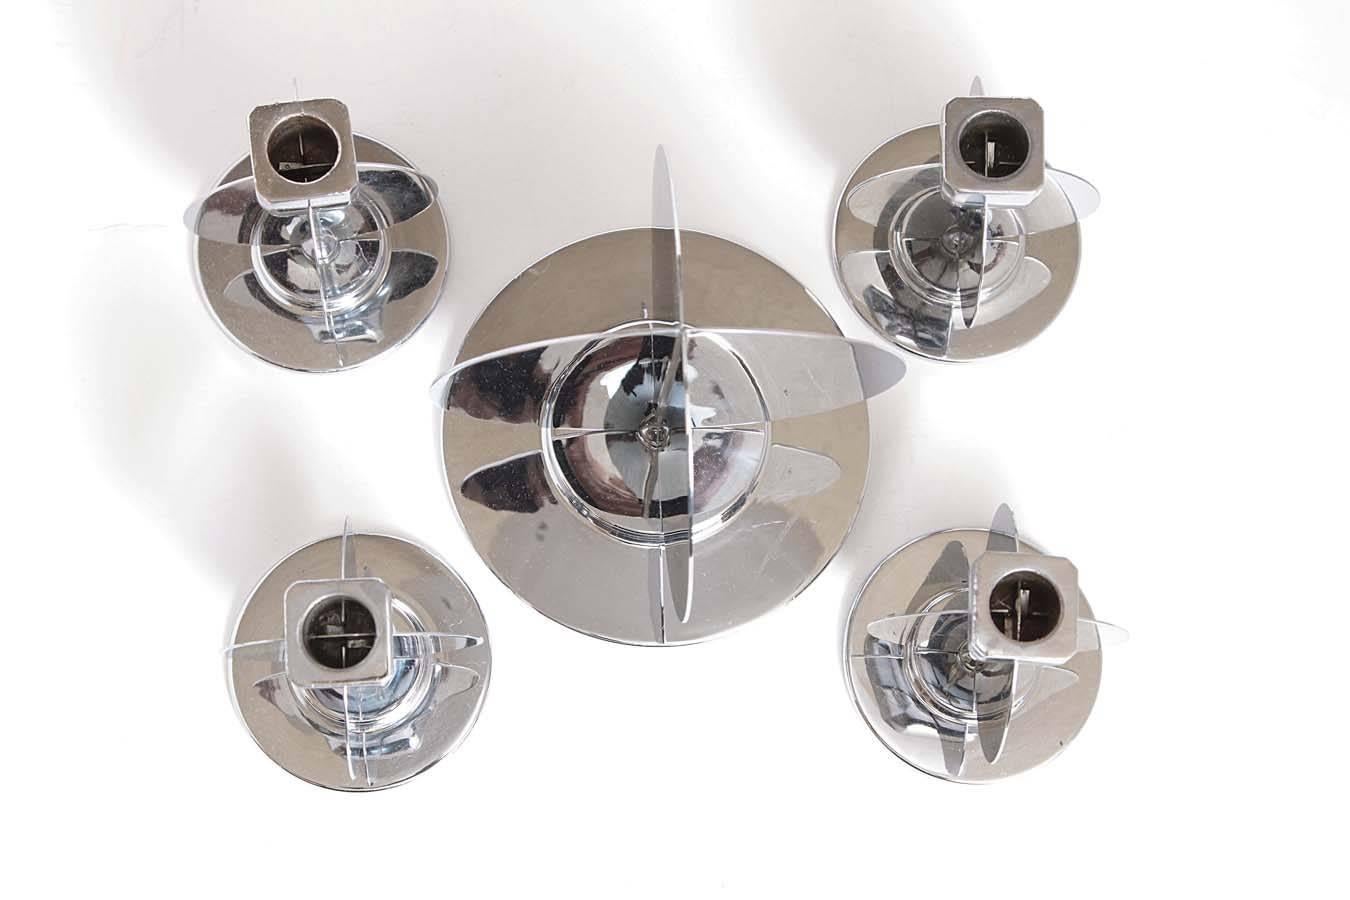 A very difficult American machine age chrome piece to source, yet alone with four matching candlestick holders and in good condition.
Manning Bowman # K178 centerpiece with # K177 c'sticks, circa 1933-1934.
Distinct intersecting-sphere modernist